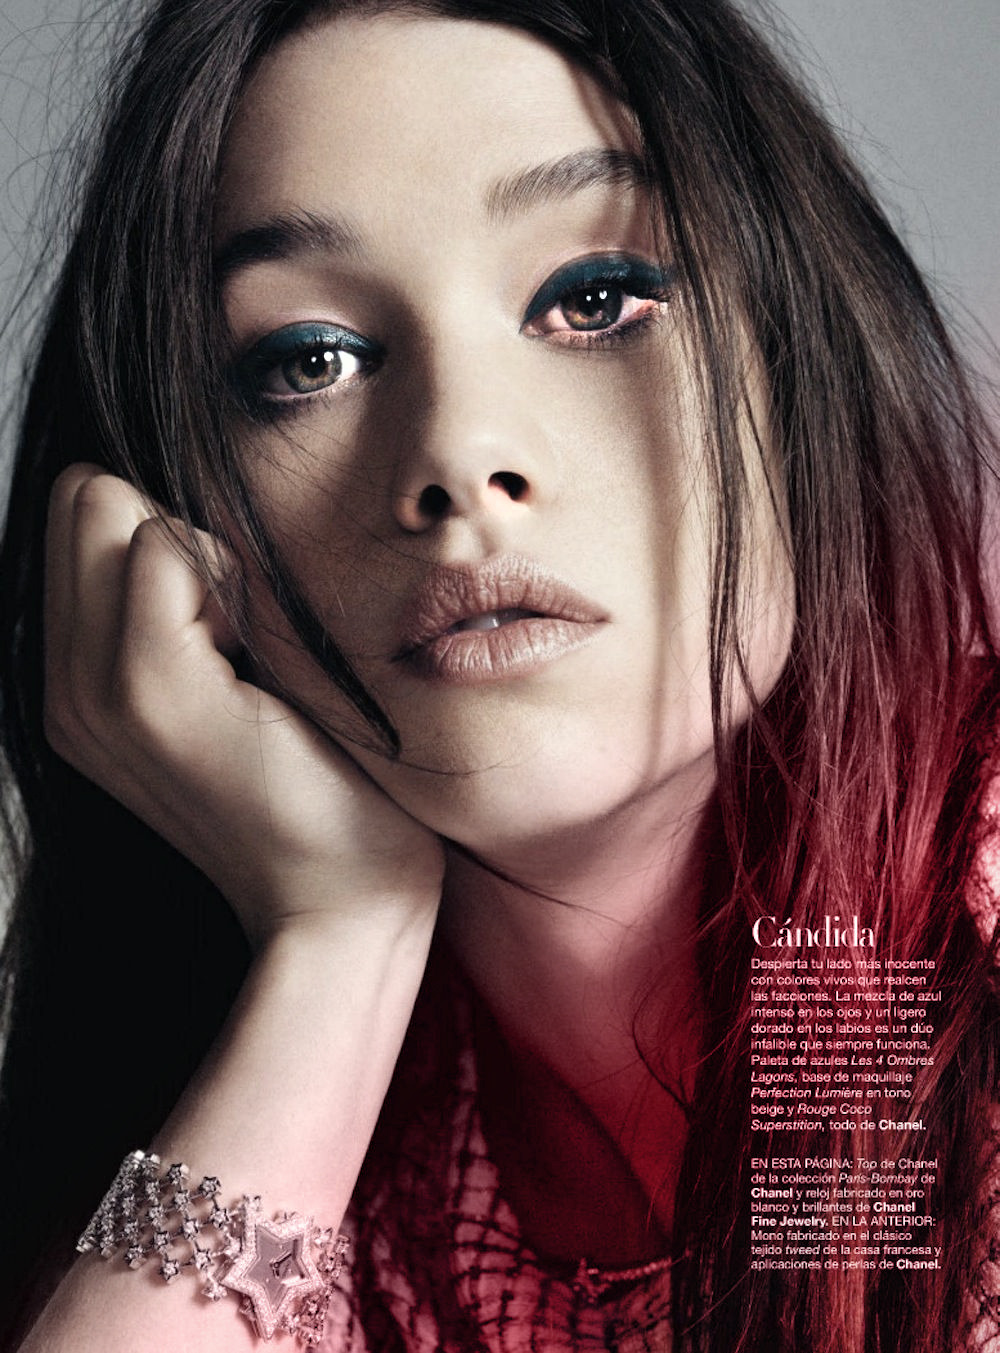  Favourite female stars 1/50 (not in particular order) » Astrid Bergès-Frisbey